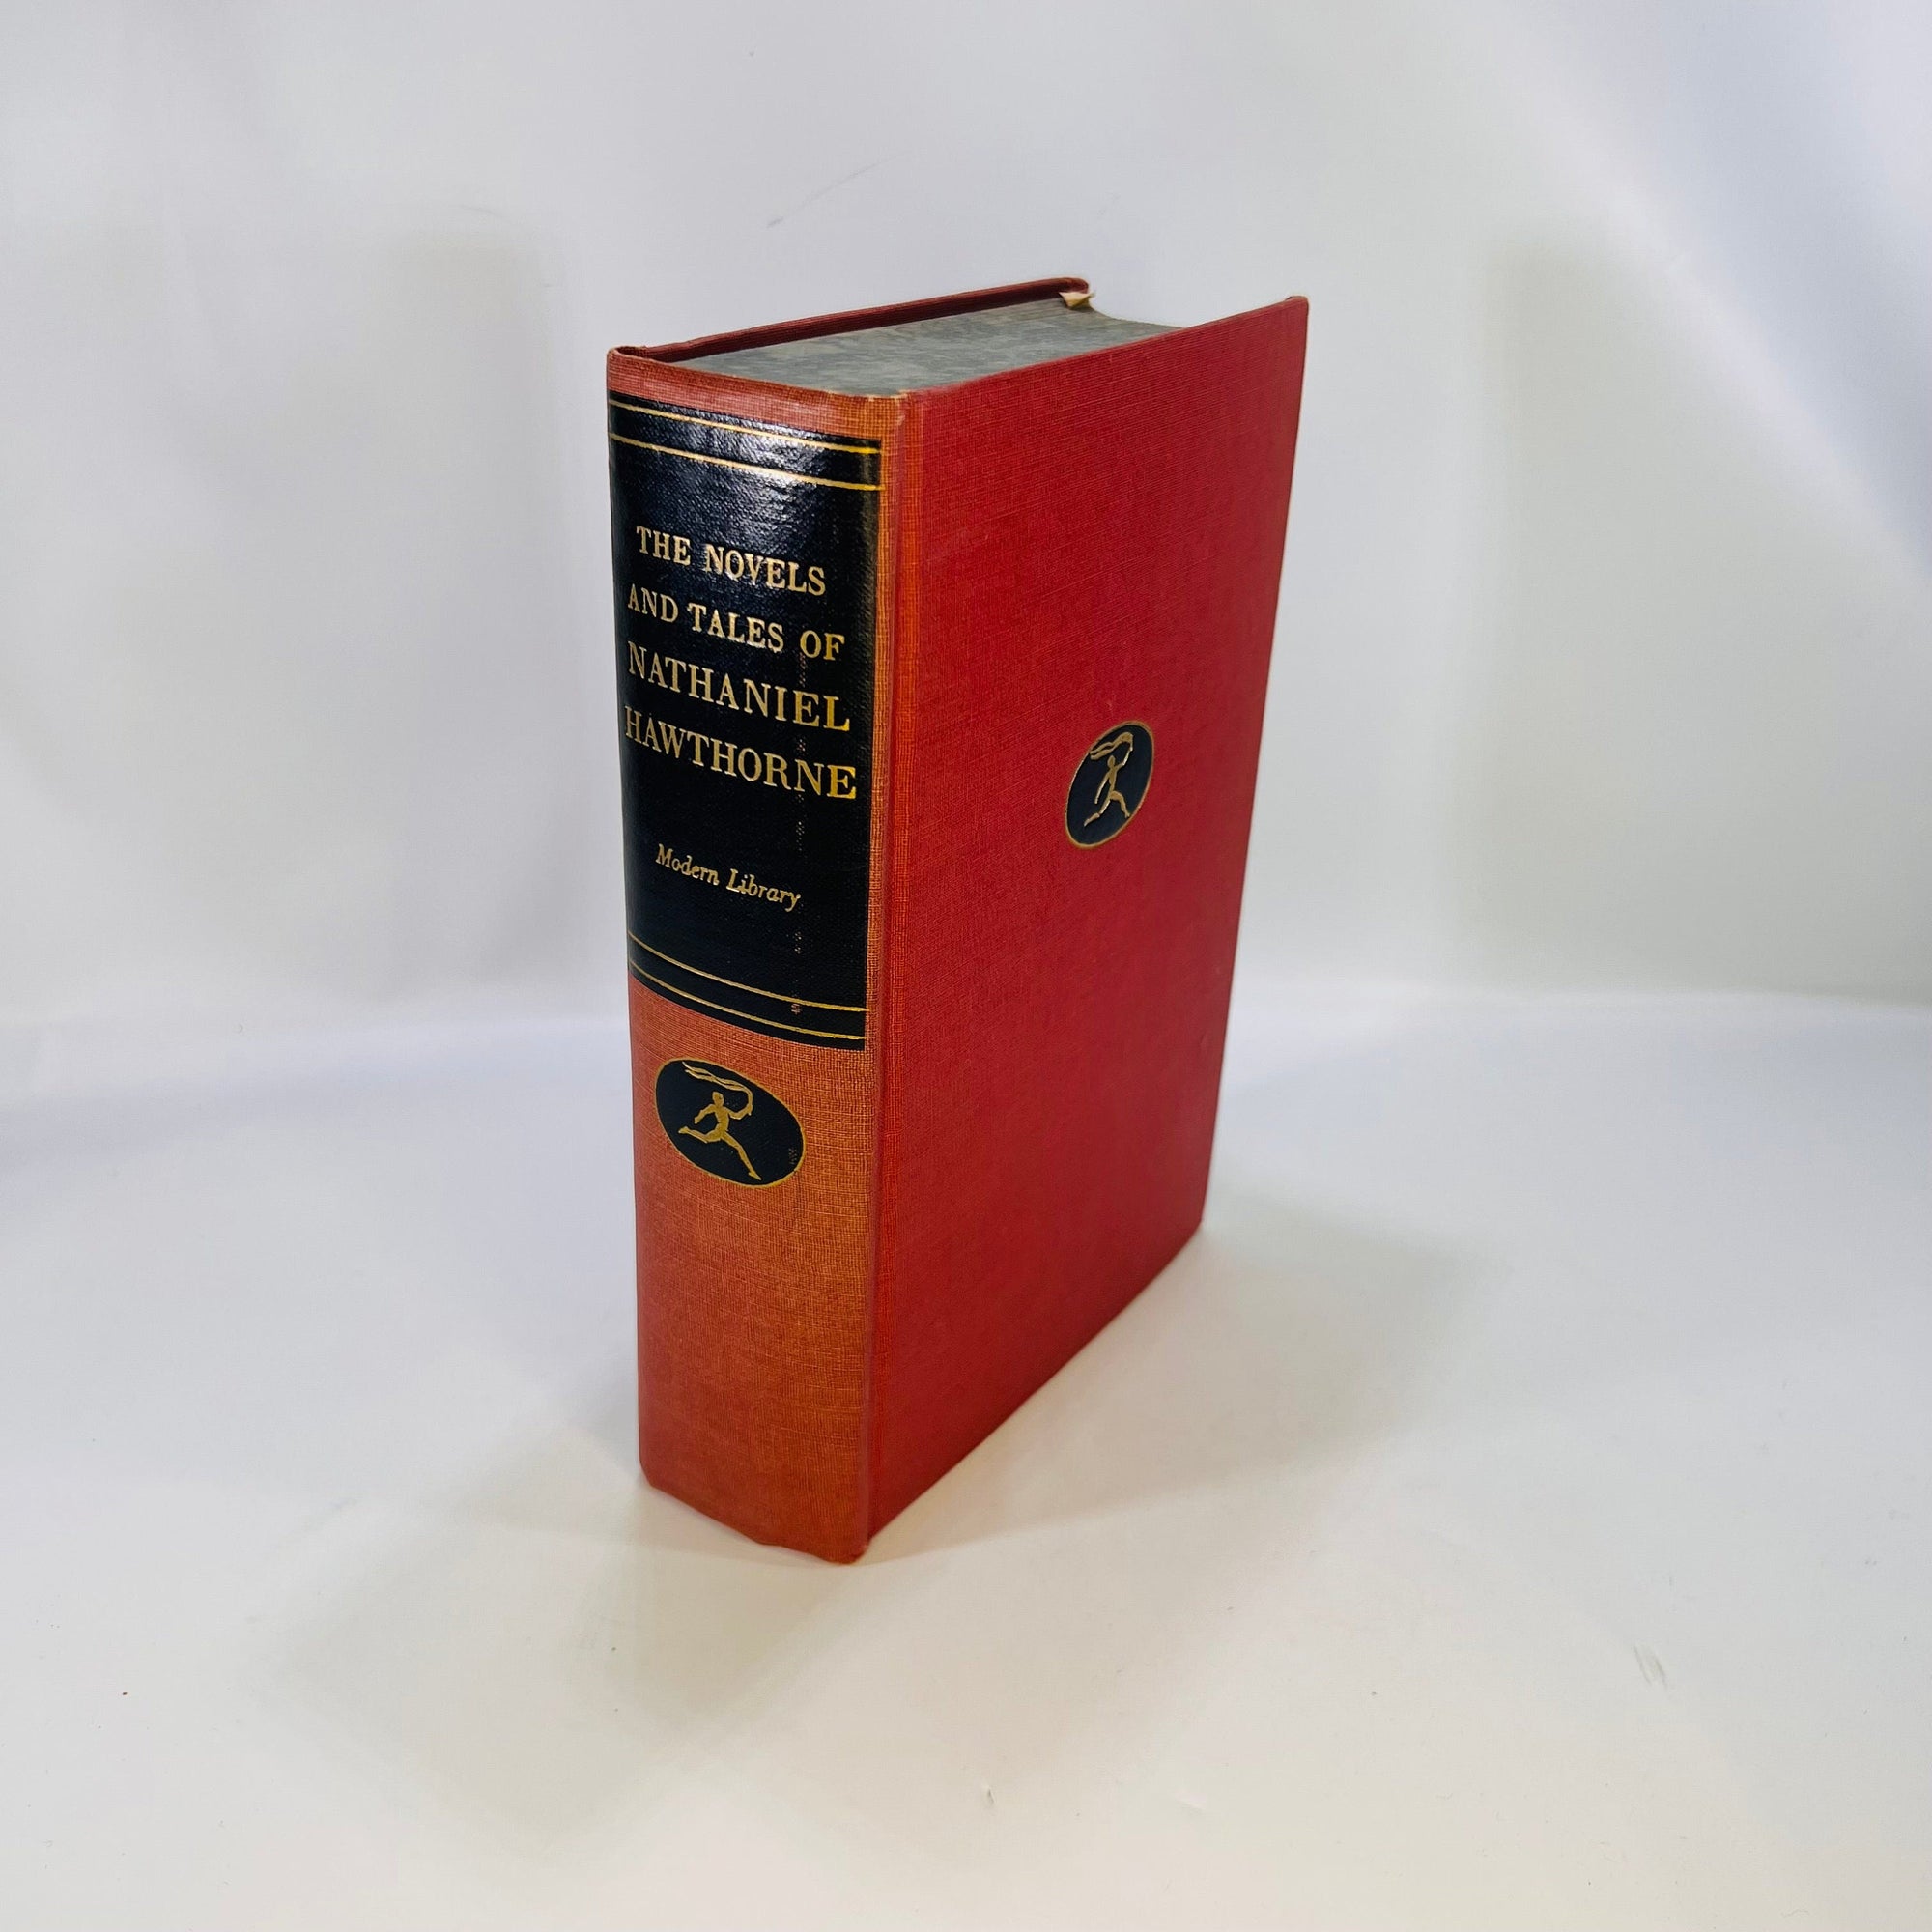 The Novels and Tales of Nathaniel Hawthorne introduction by Norman Pearson 1937 A Modern Library Random House Vintage Book